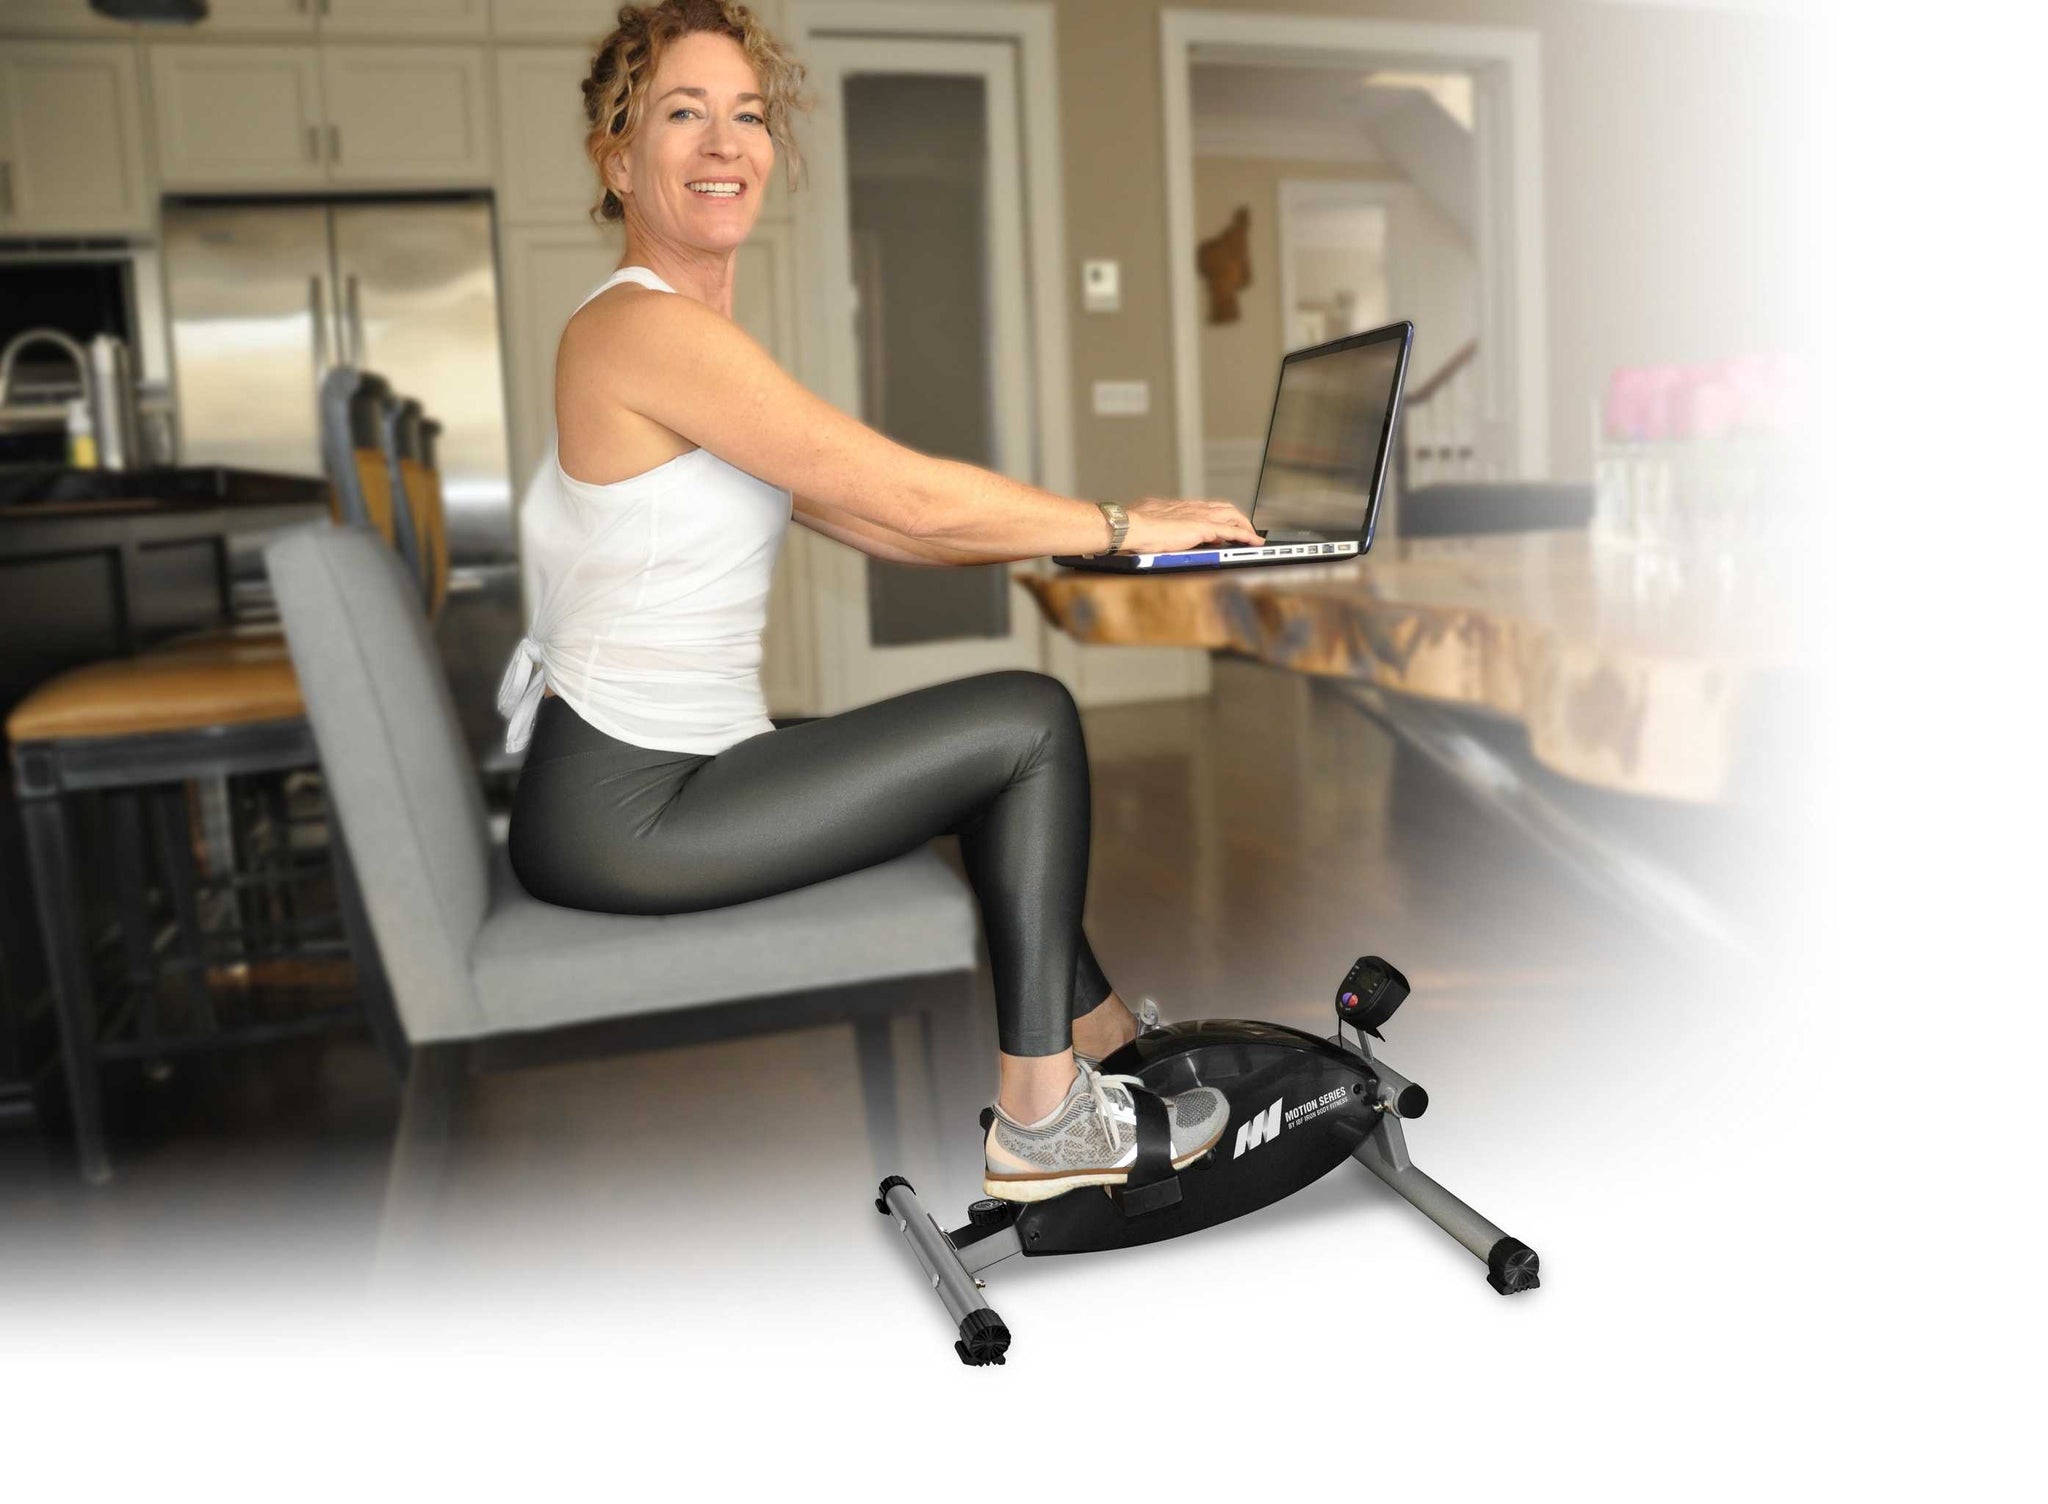 Motion Series C3 Mini Exercise Bike, Compact Under Desk Cycle